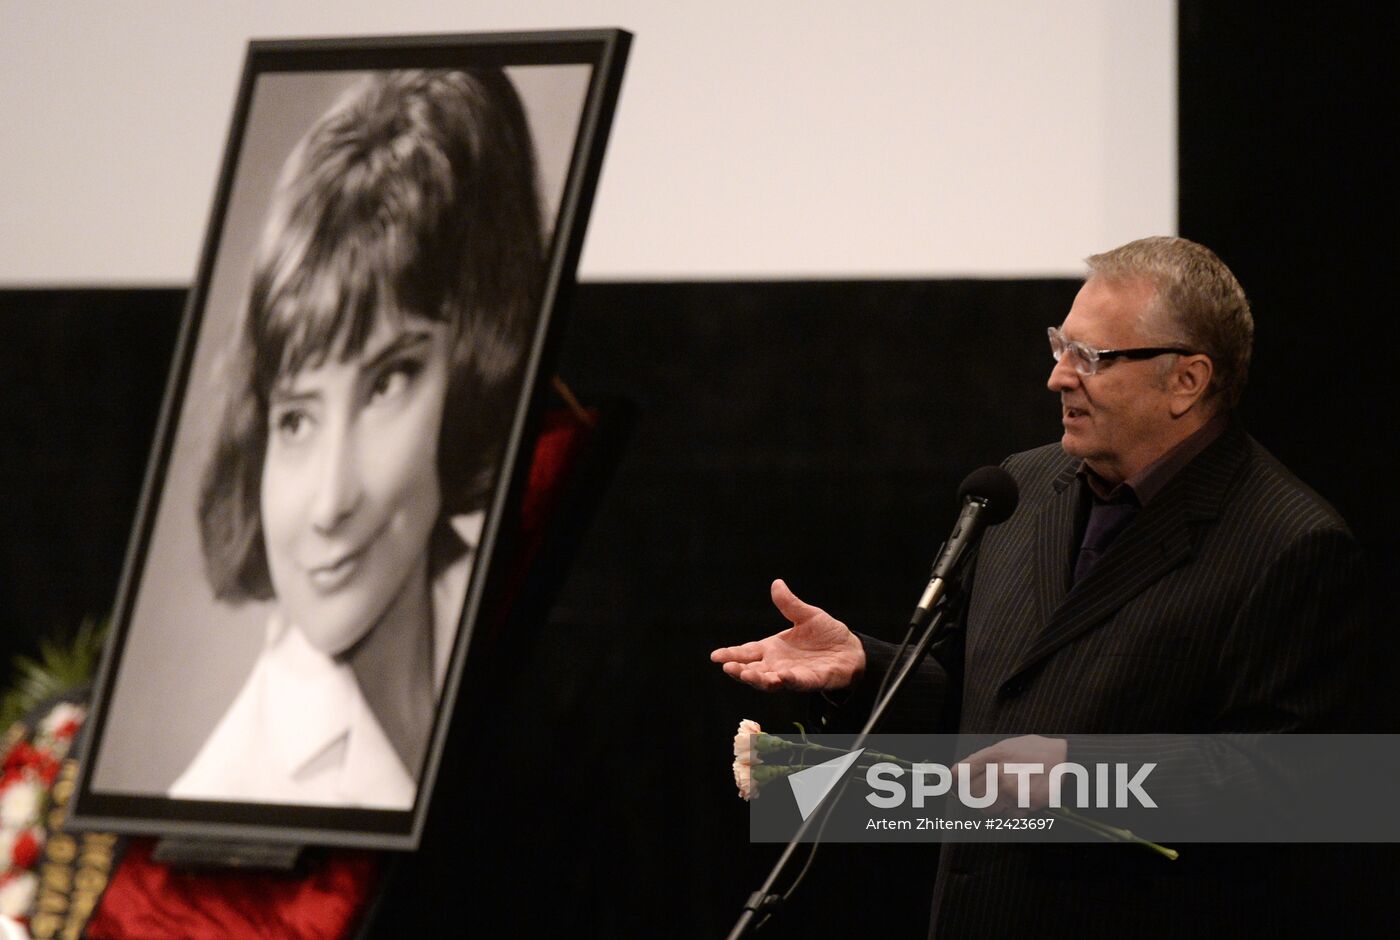 People pay their last respects to actress Tatyana Samoliova